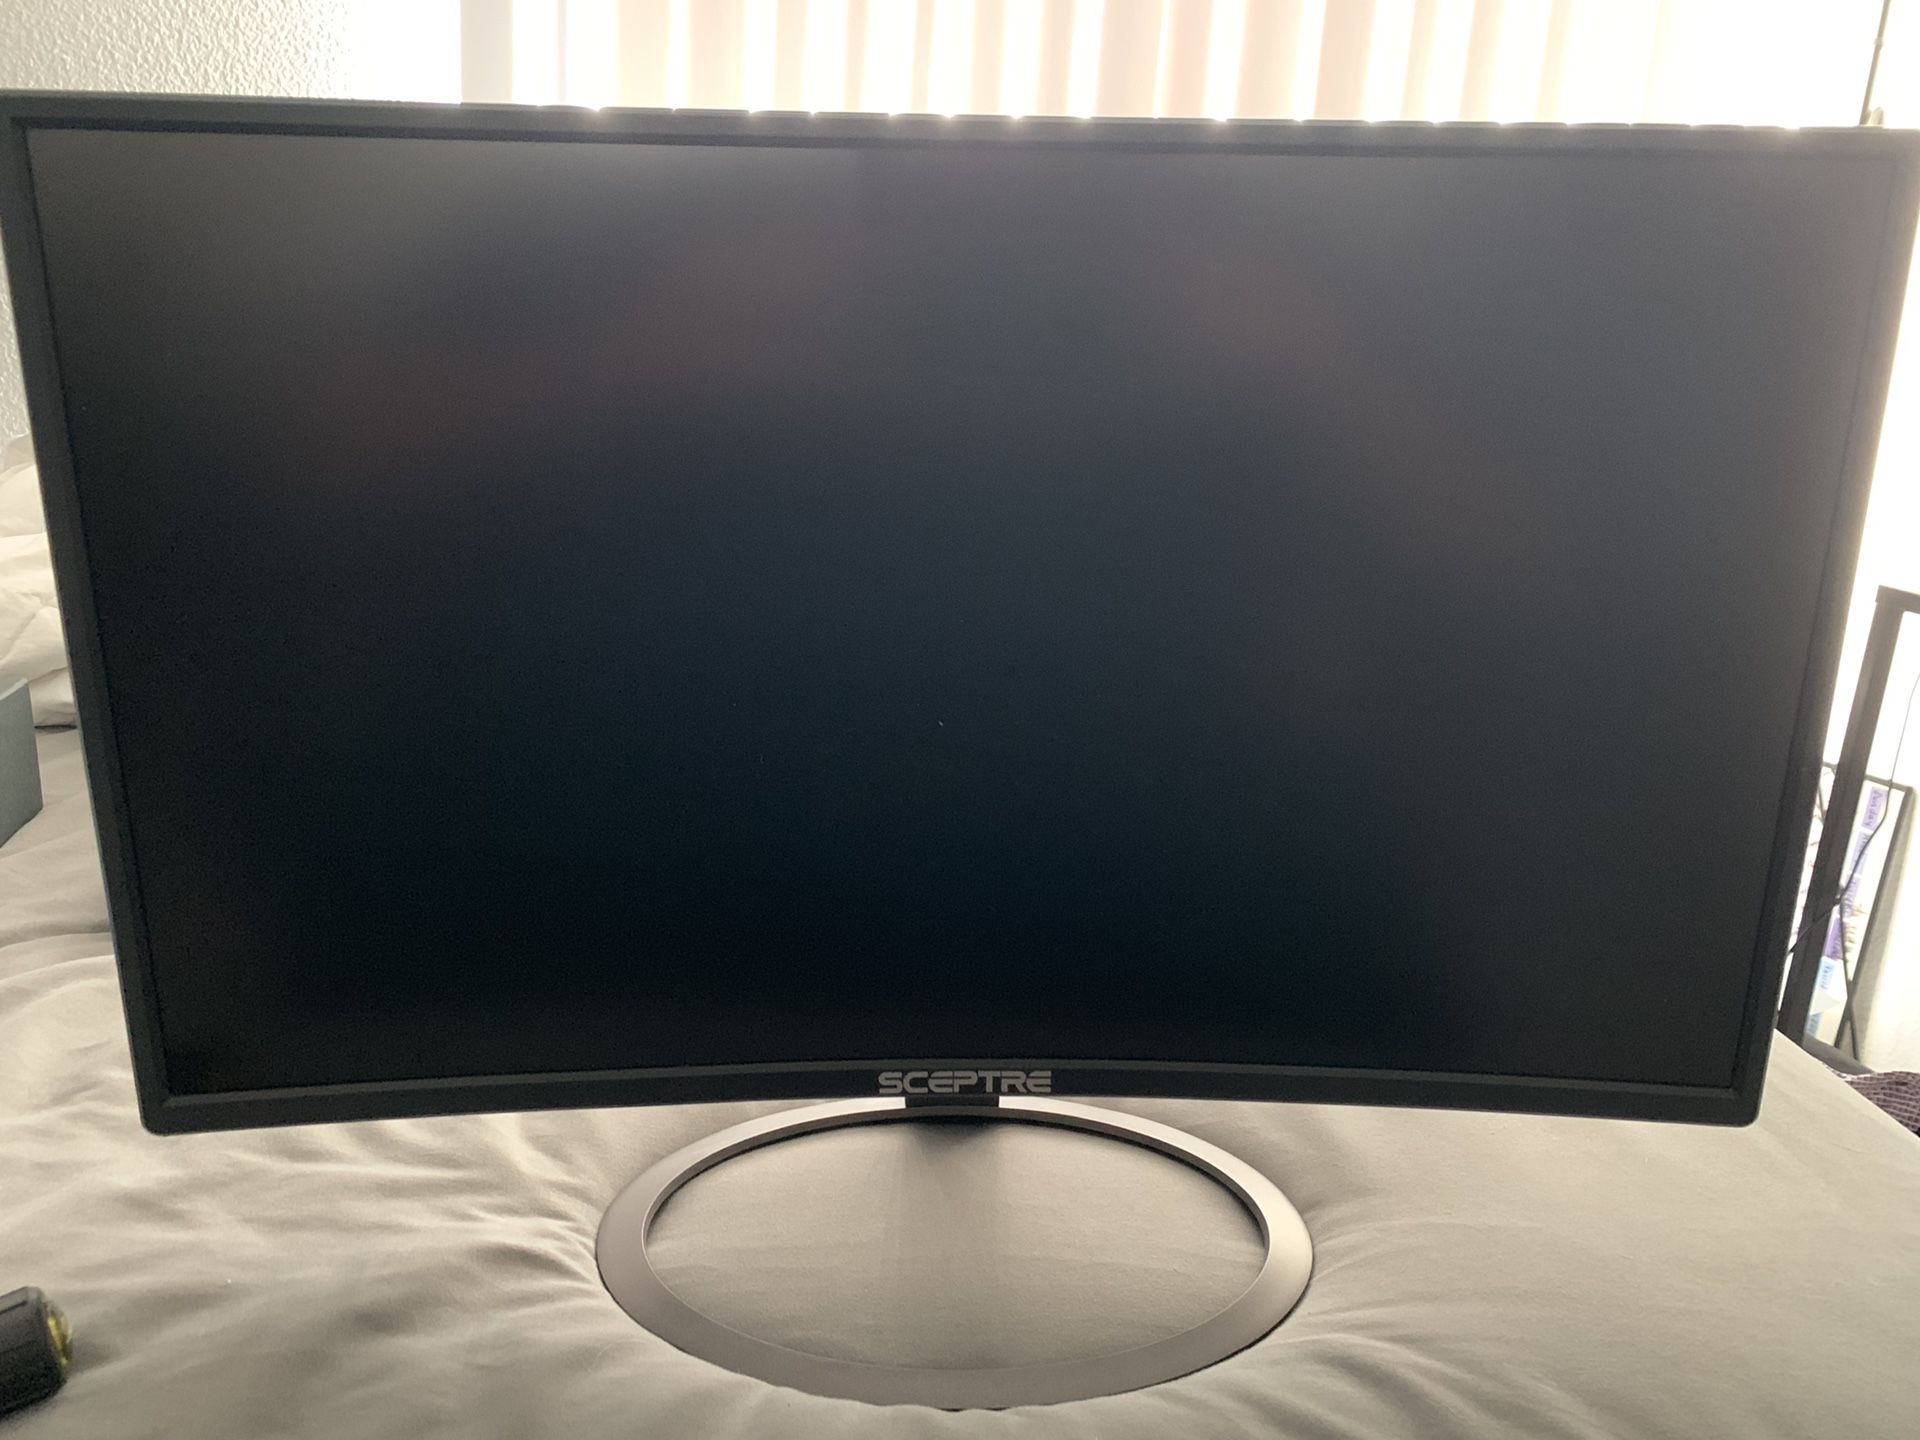 Sceptre 24 in curved monitor